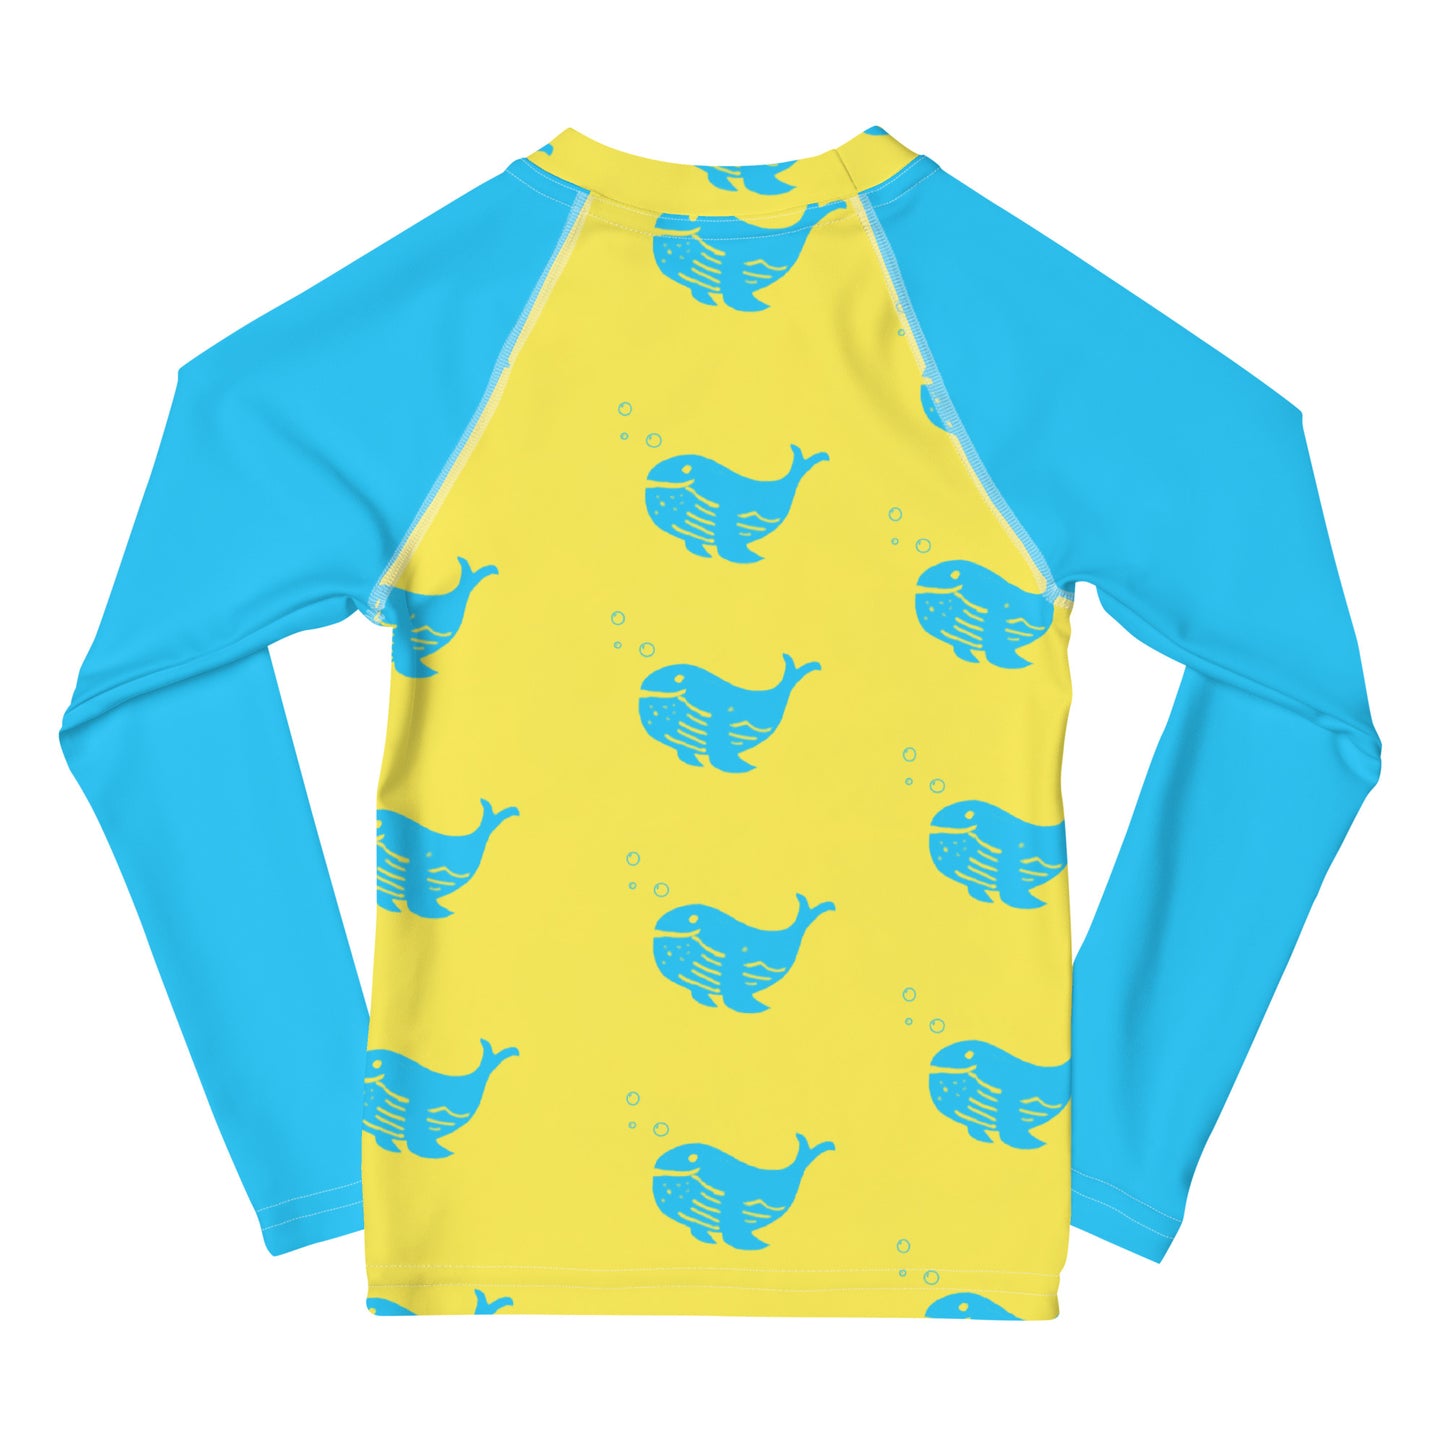 Boys Rash Guard with Blue Whales (Size 2T-7)